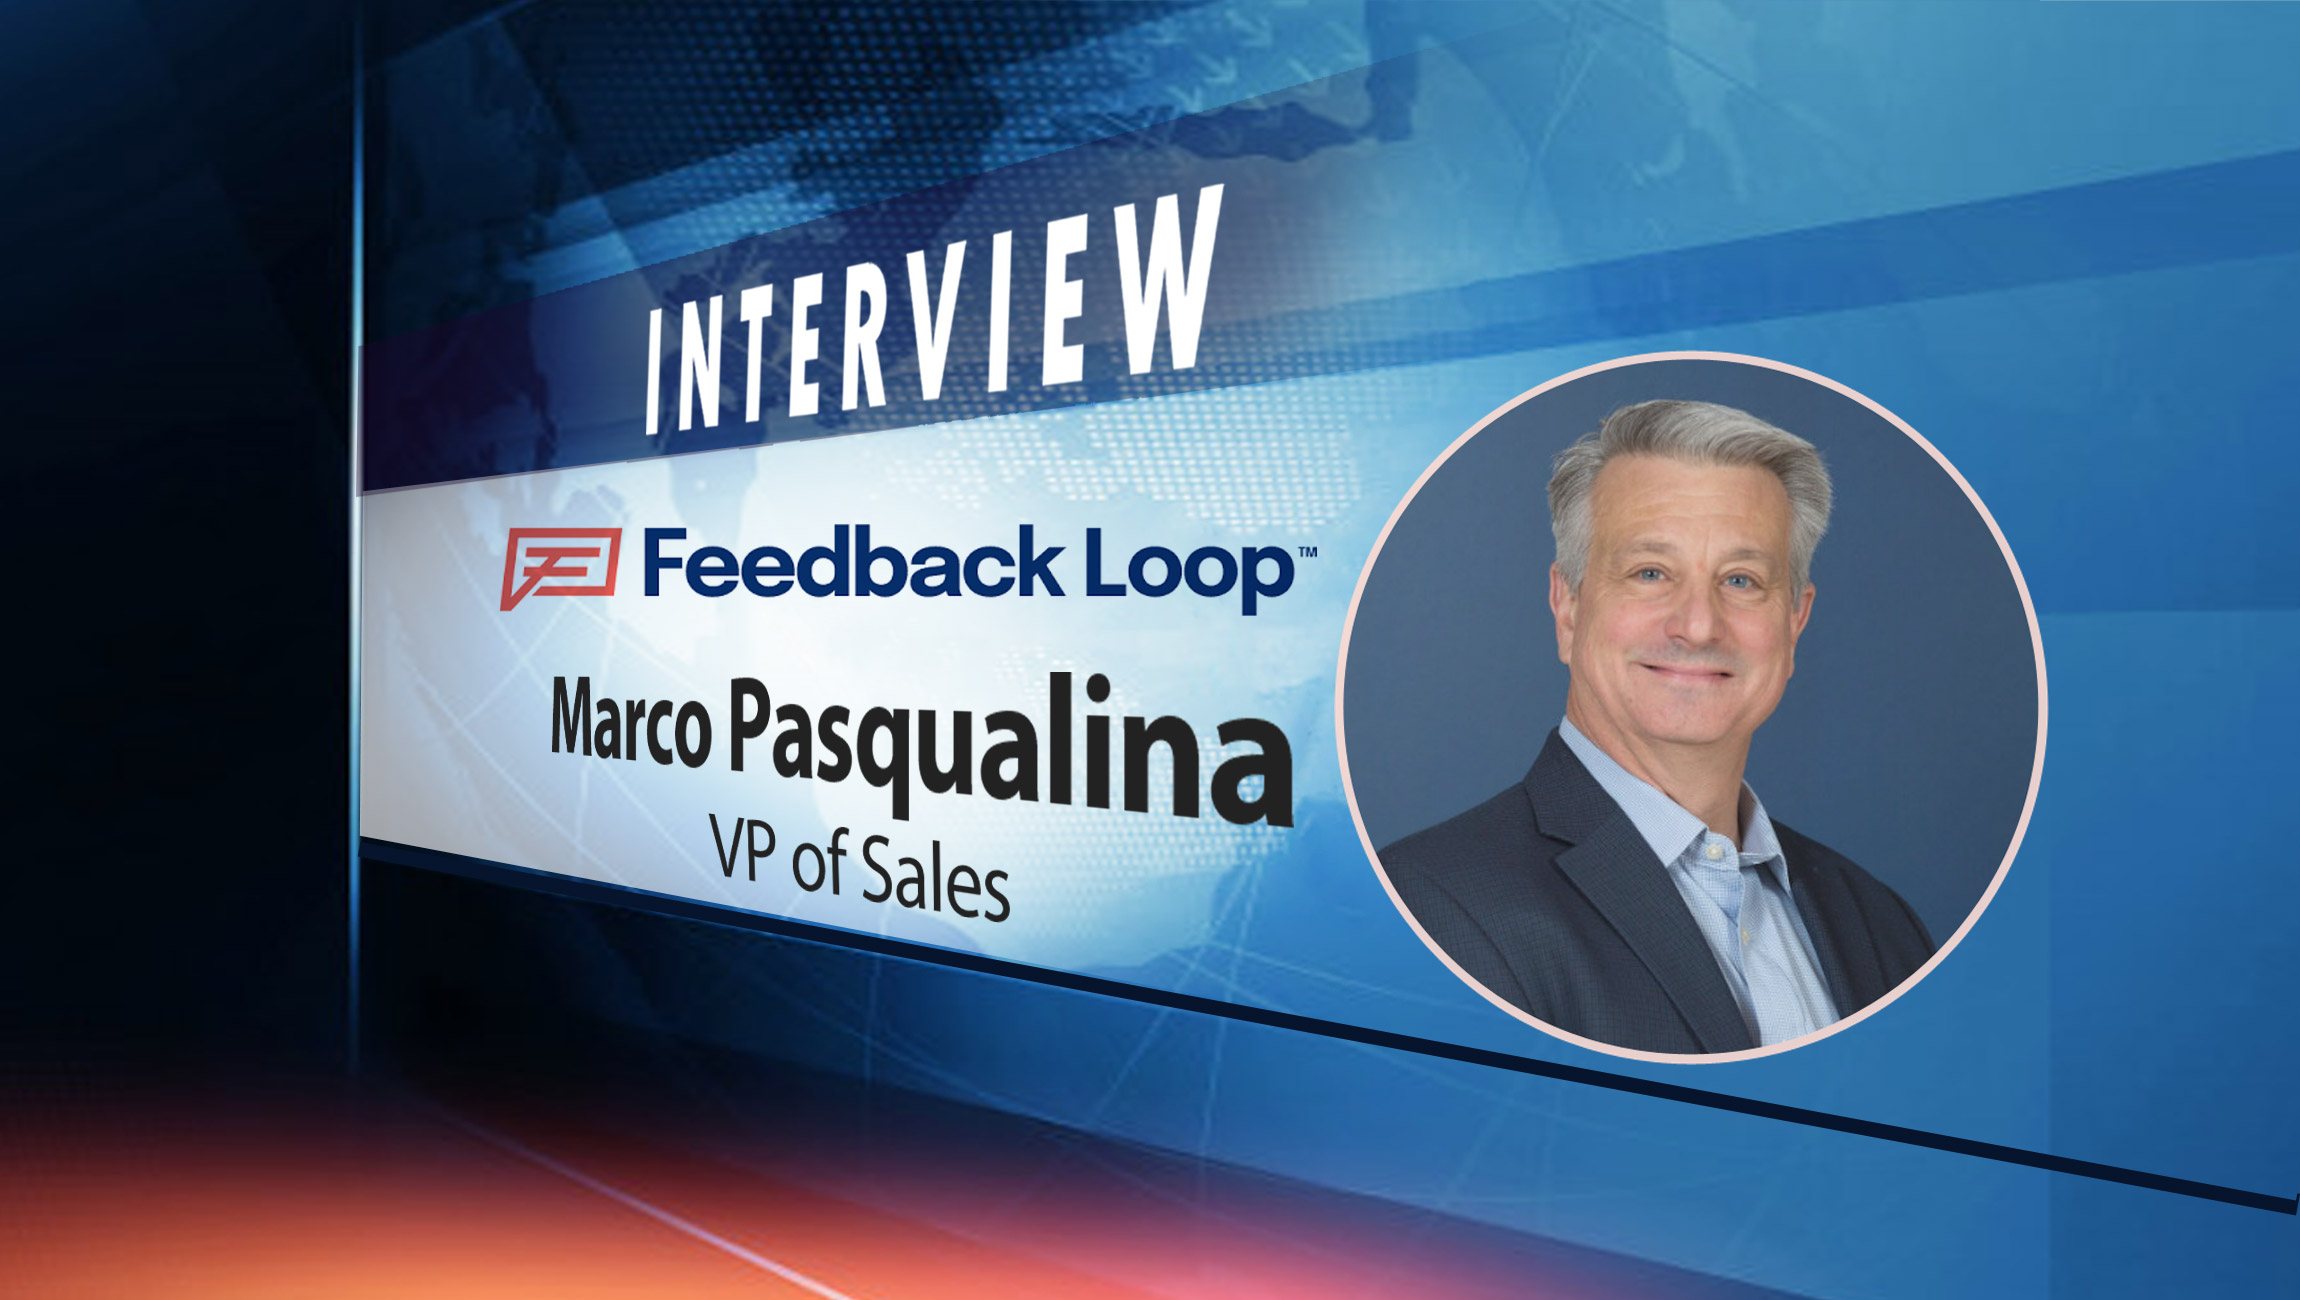 SalesTechStar Interview with Marco Pasqualina, VP of Sales at Feedback Loop